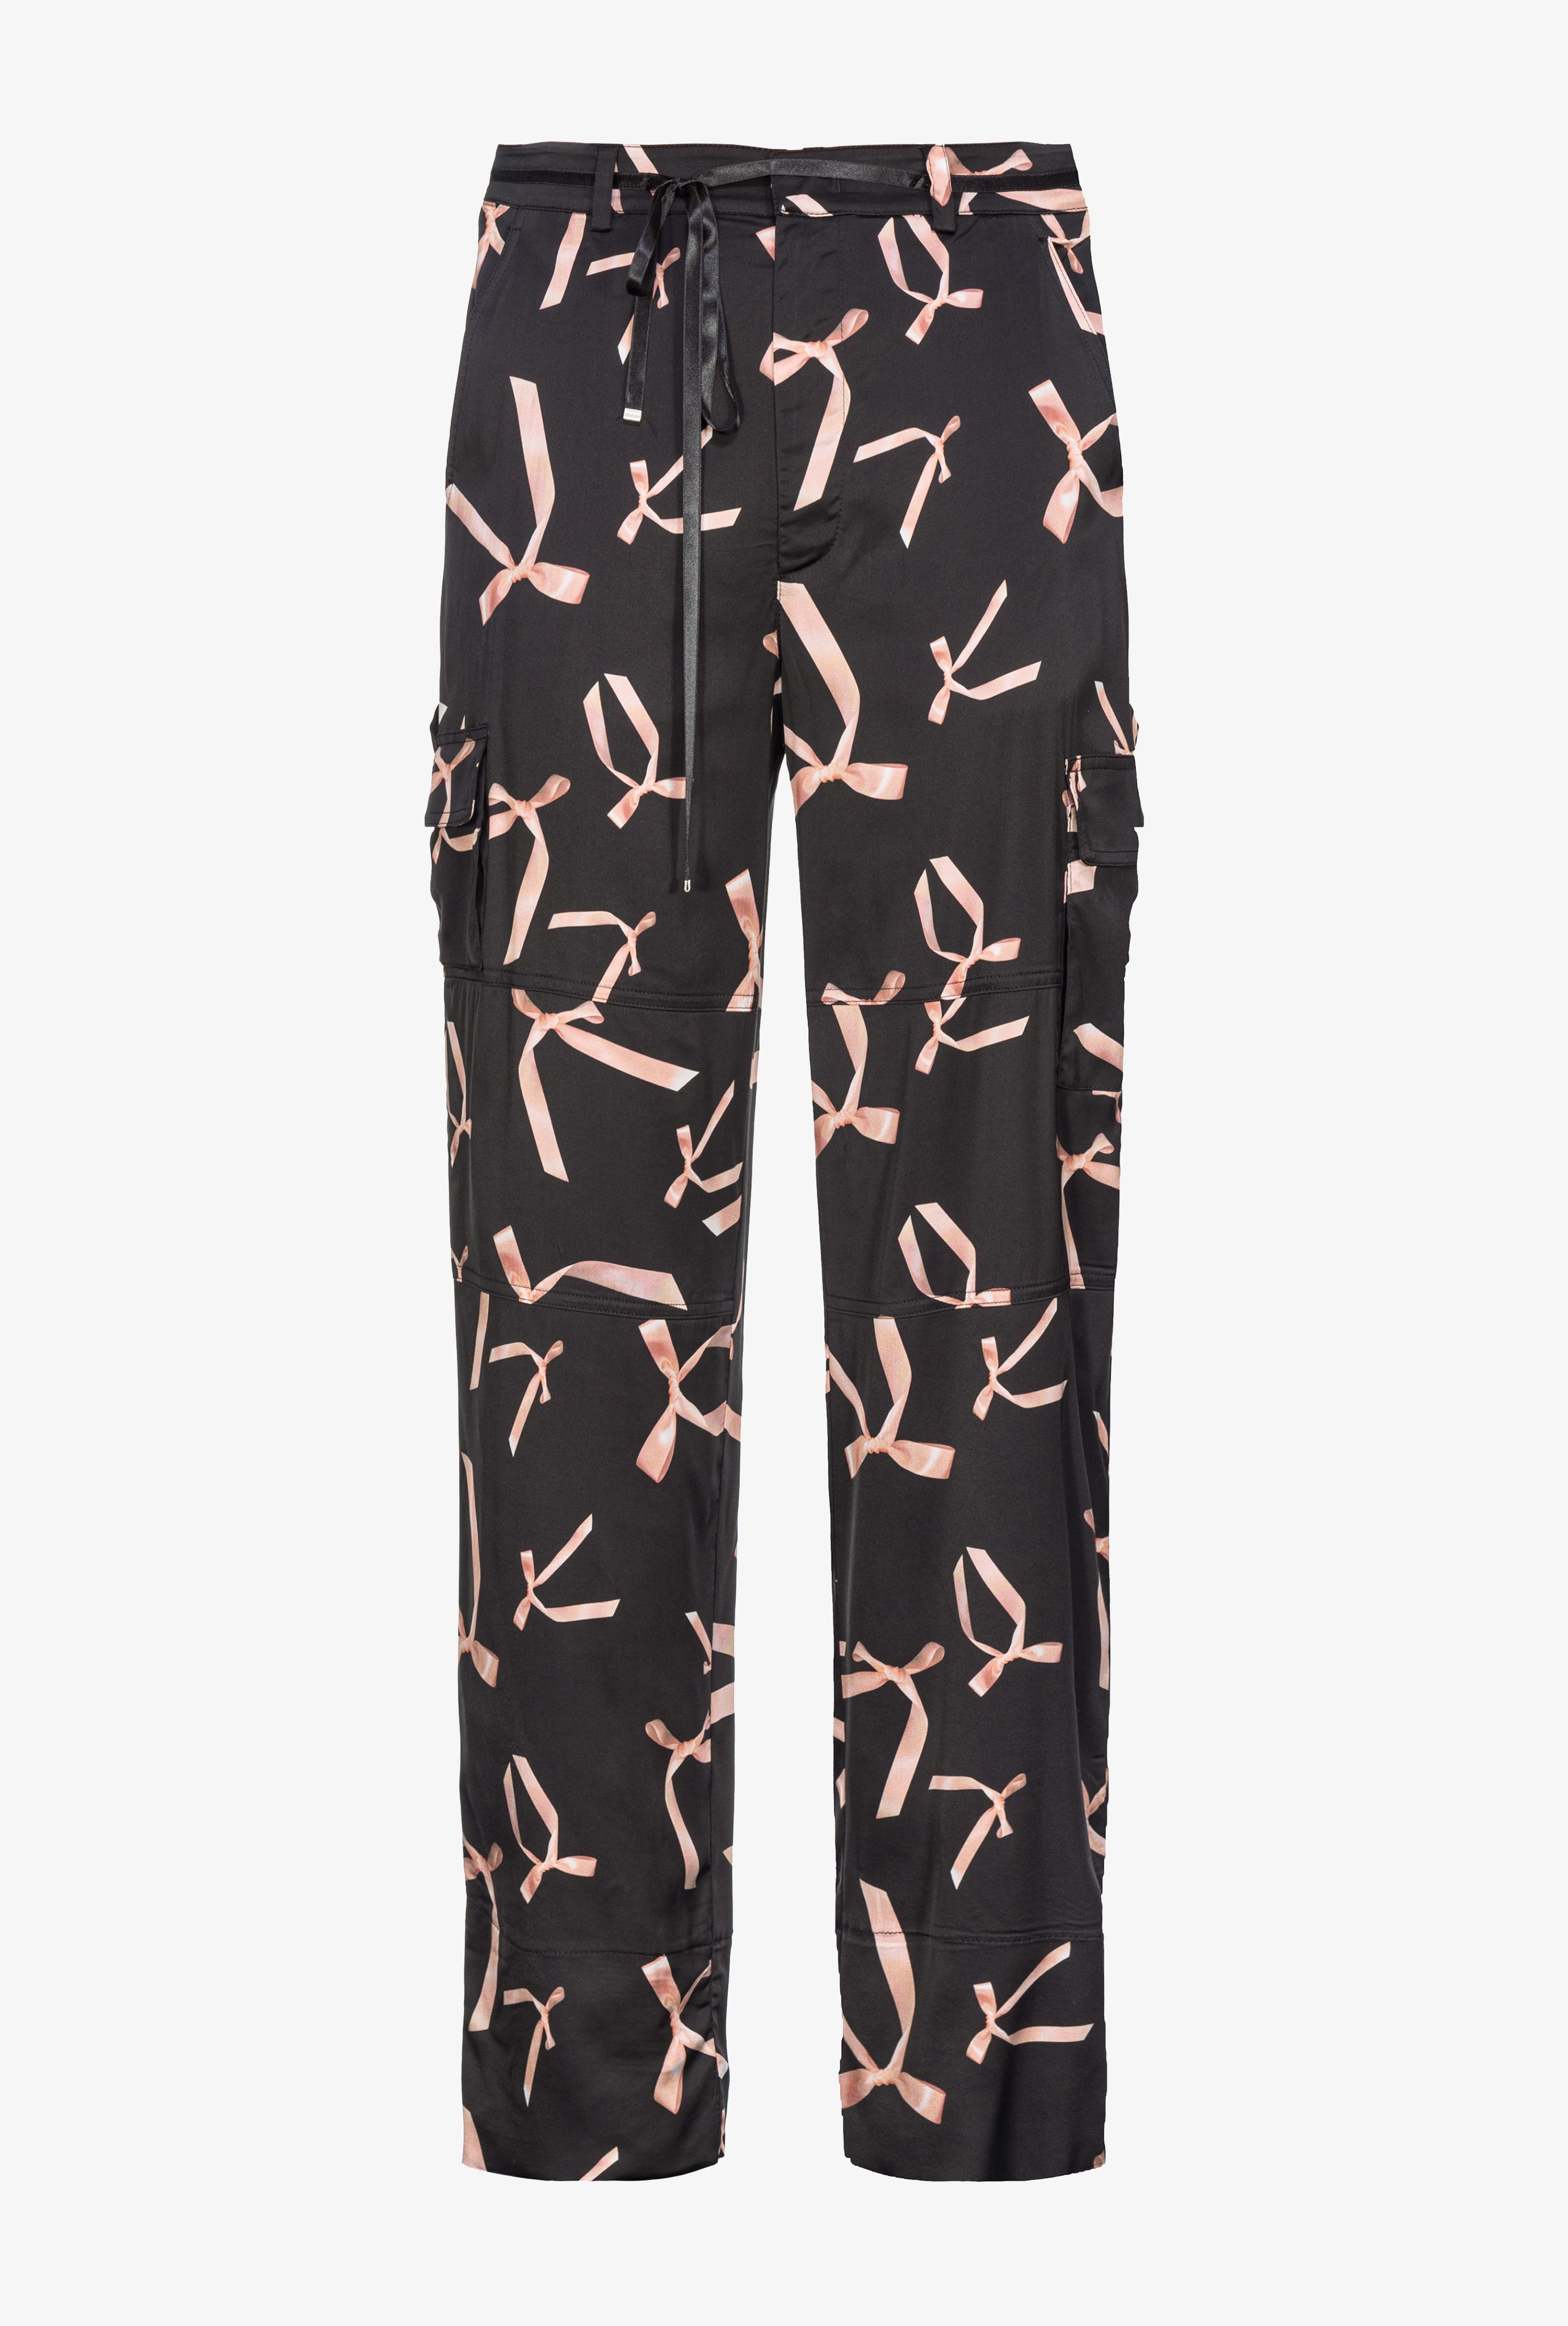 PINKO REIMAGINE BOW-PRINT CARGO TROUSERS BY PATRICK MCDOWELL - 1